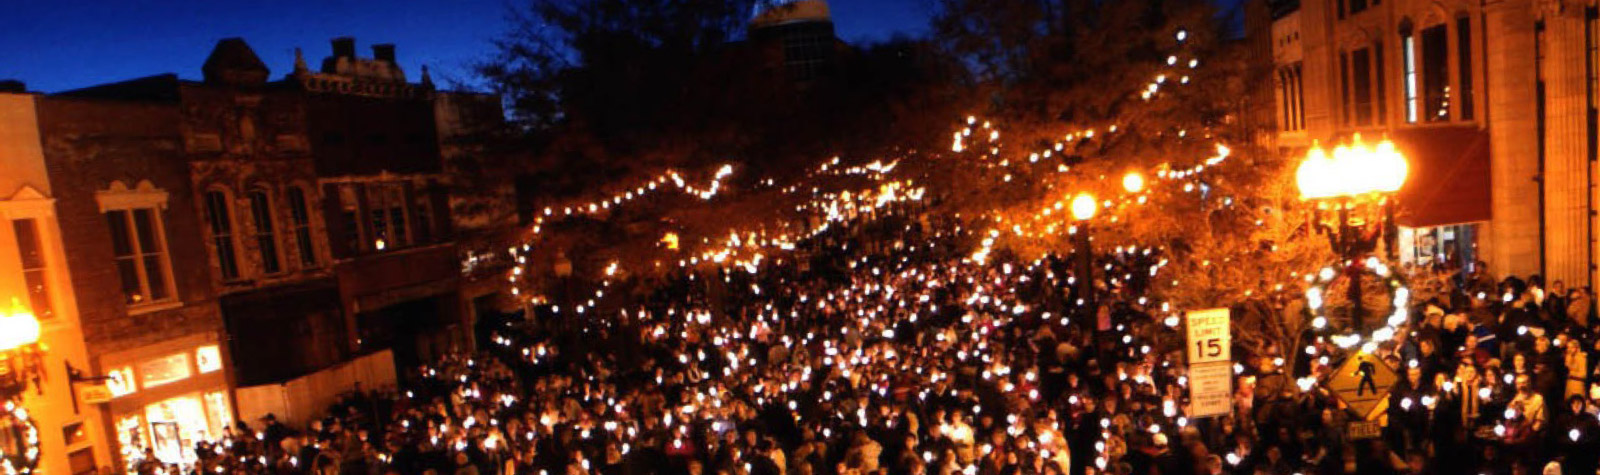 Large Candlelight Event